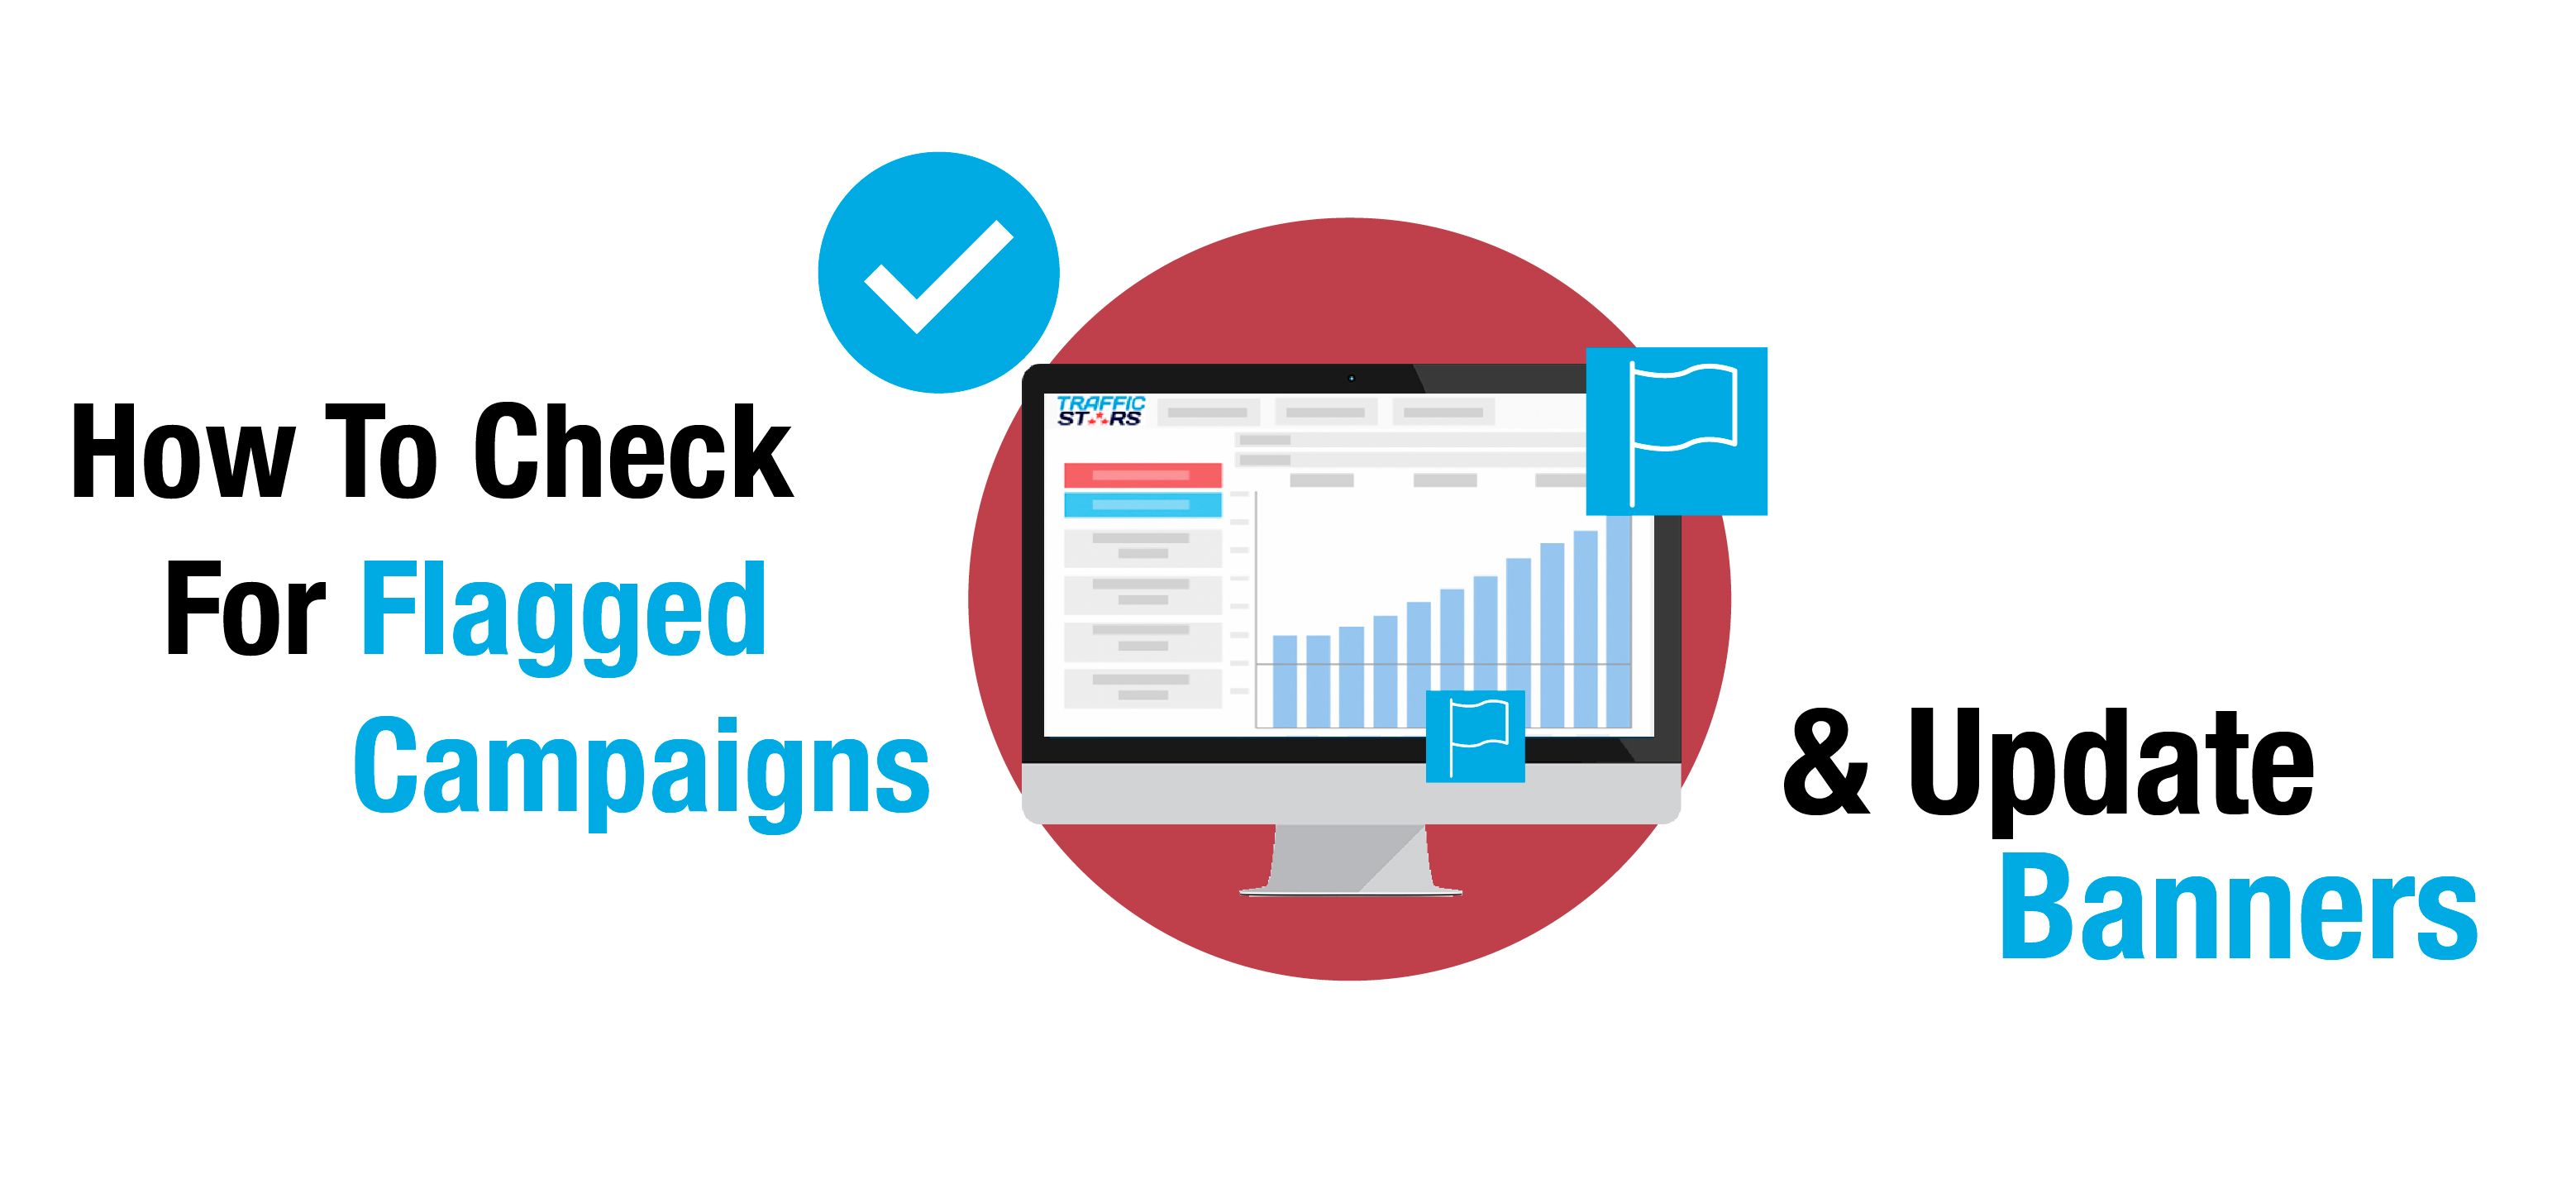 HOW TO CHECK FOR FLAGGED CAMPAIGNS & UPDATE BANNERS